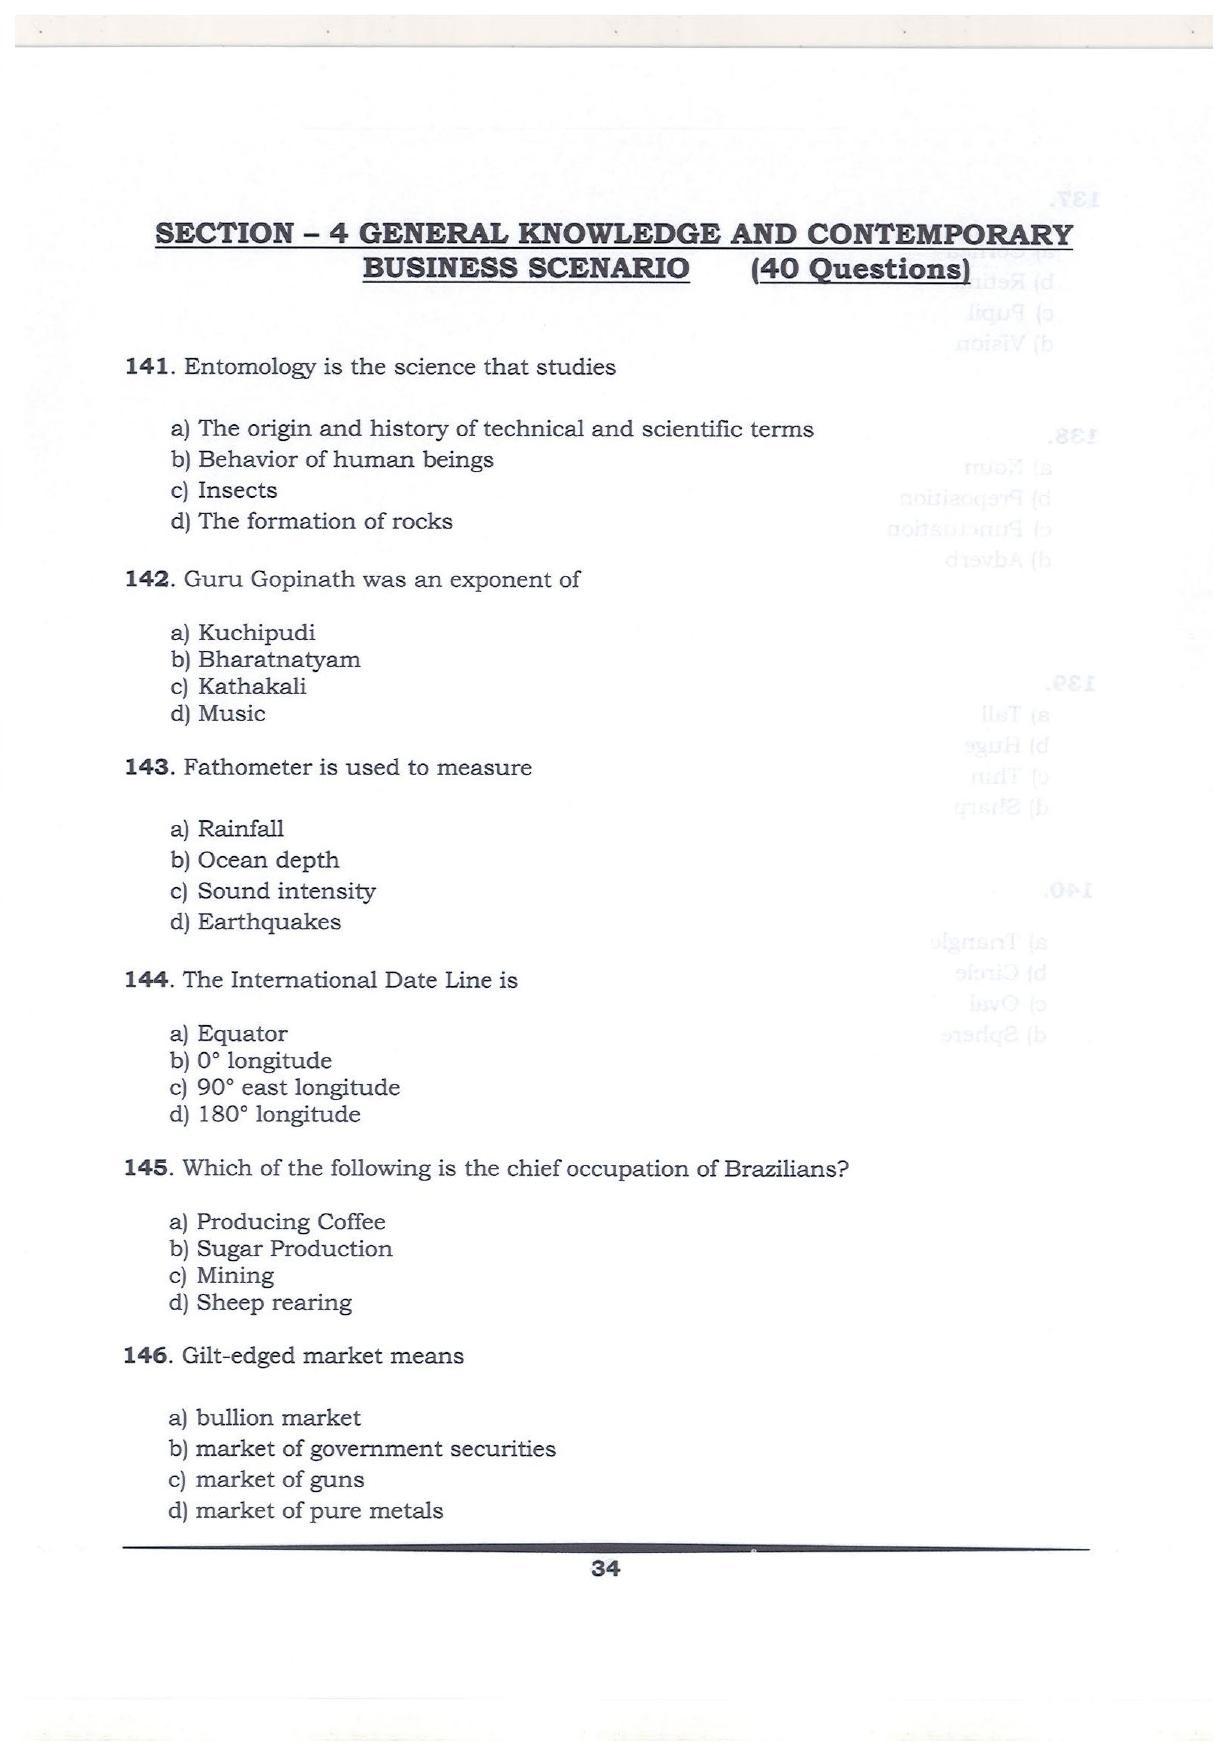 KMAT Question Papers - February 2018 - Page 33